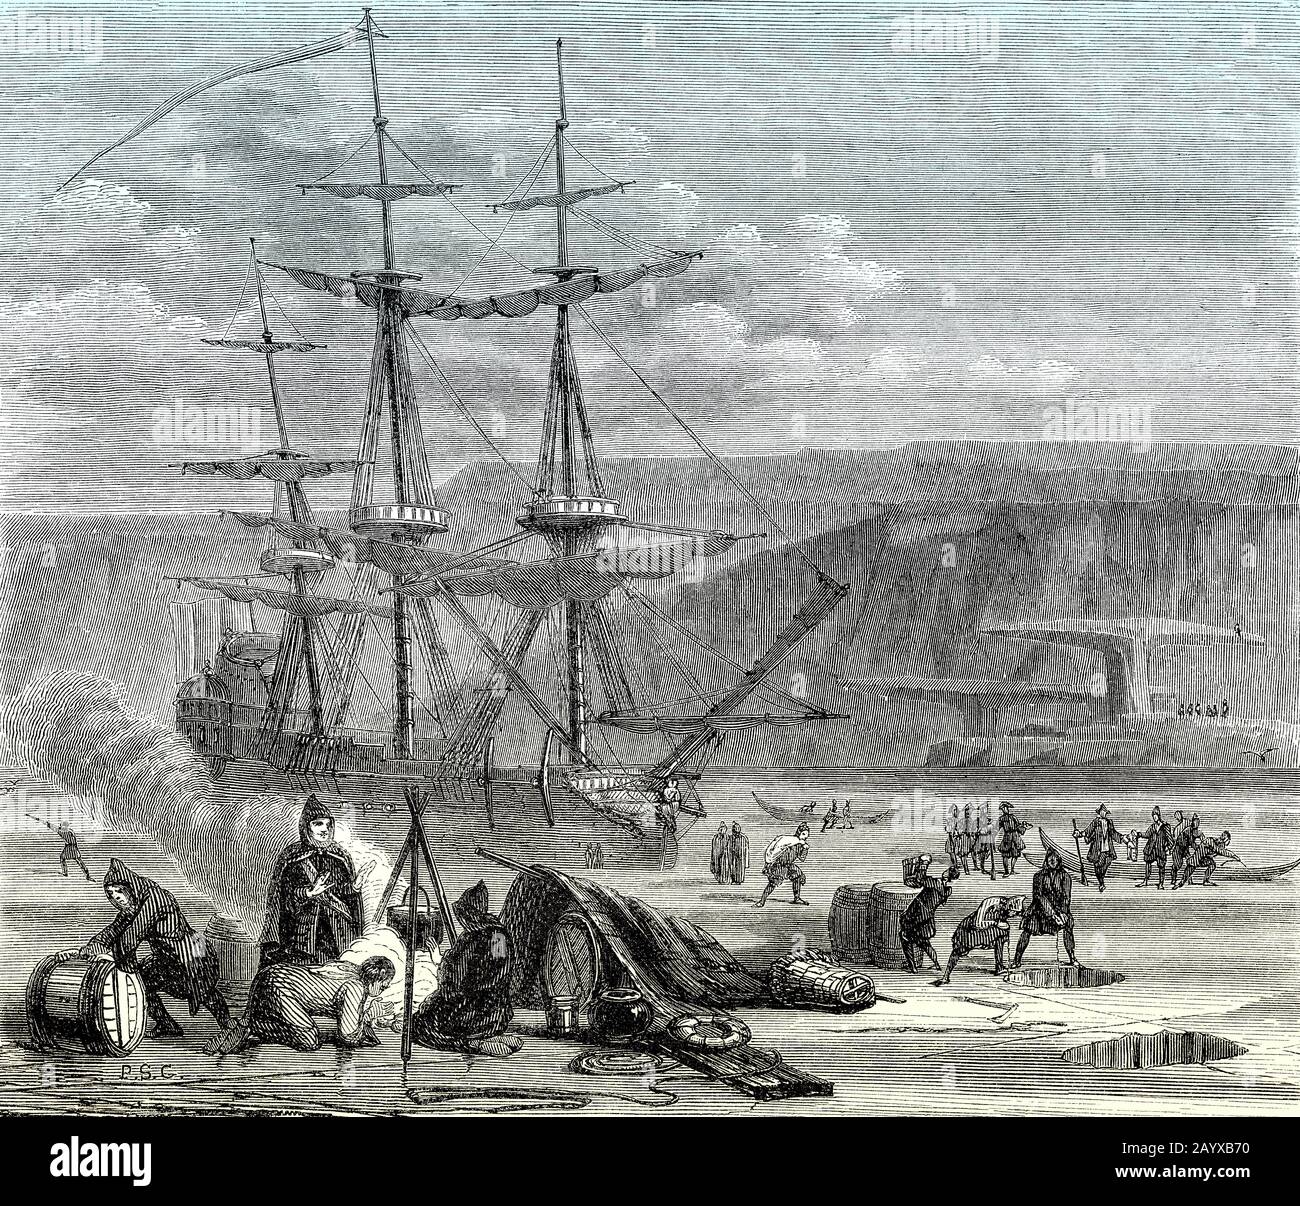 The Pélican, French warship, ran aground on the shores of Hudson Bay in January 1697 Stock Photo